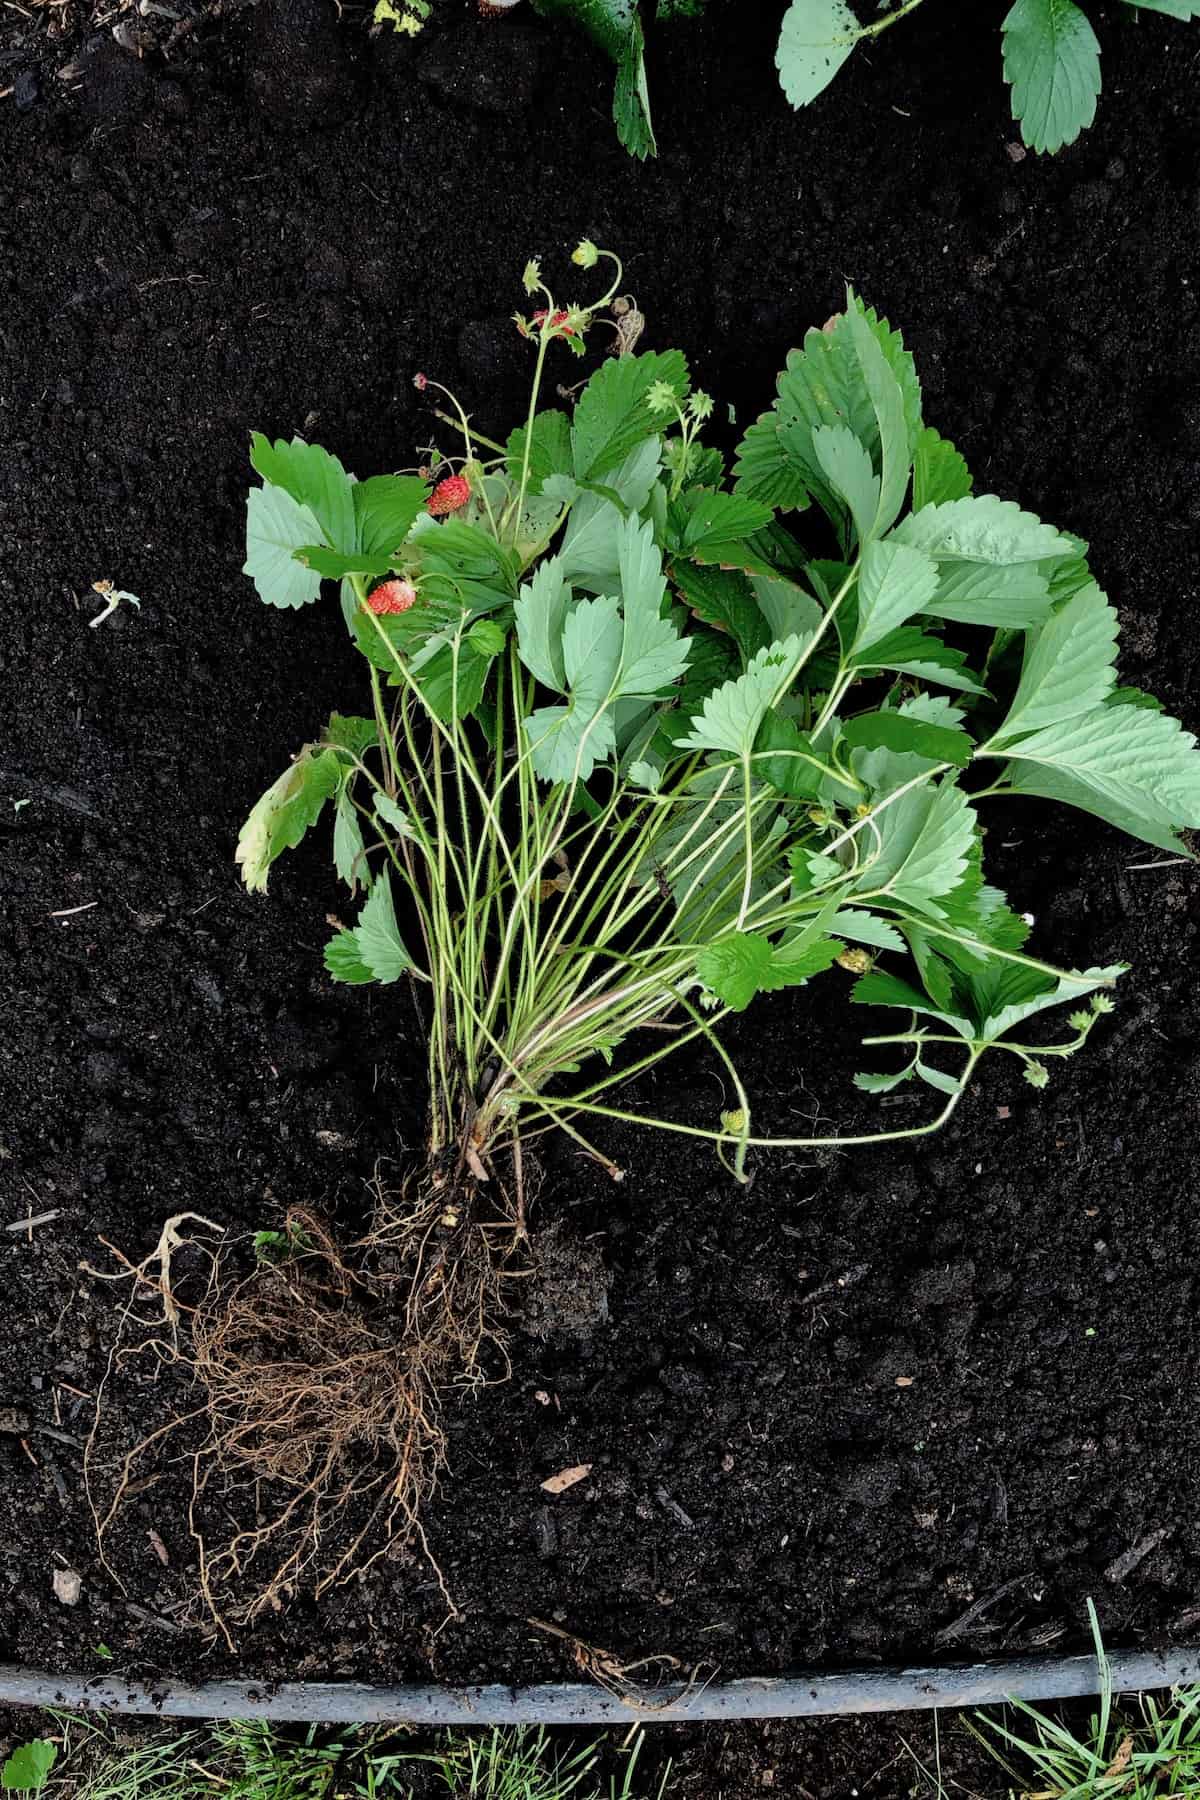 Alpine strawberry plant - shows leaves, berries, crown, roots